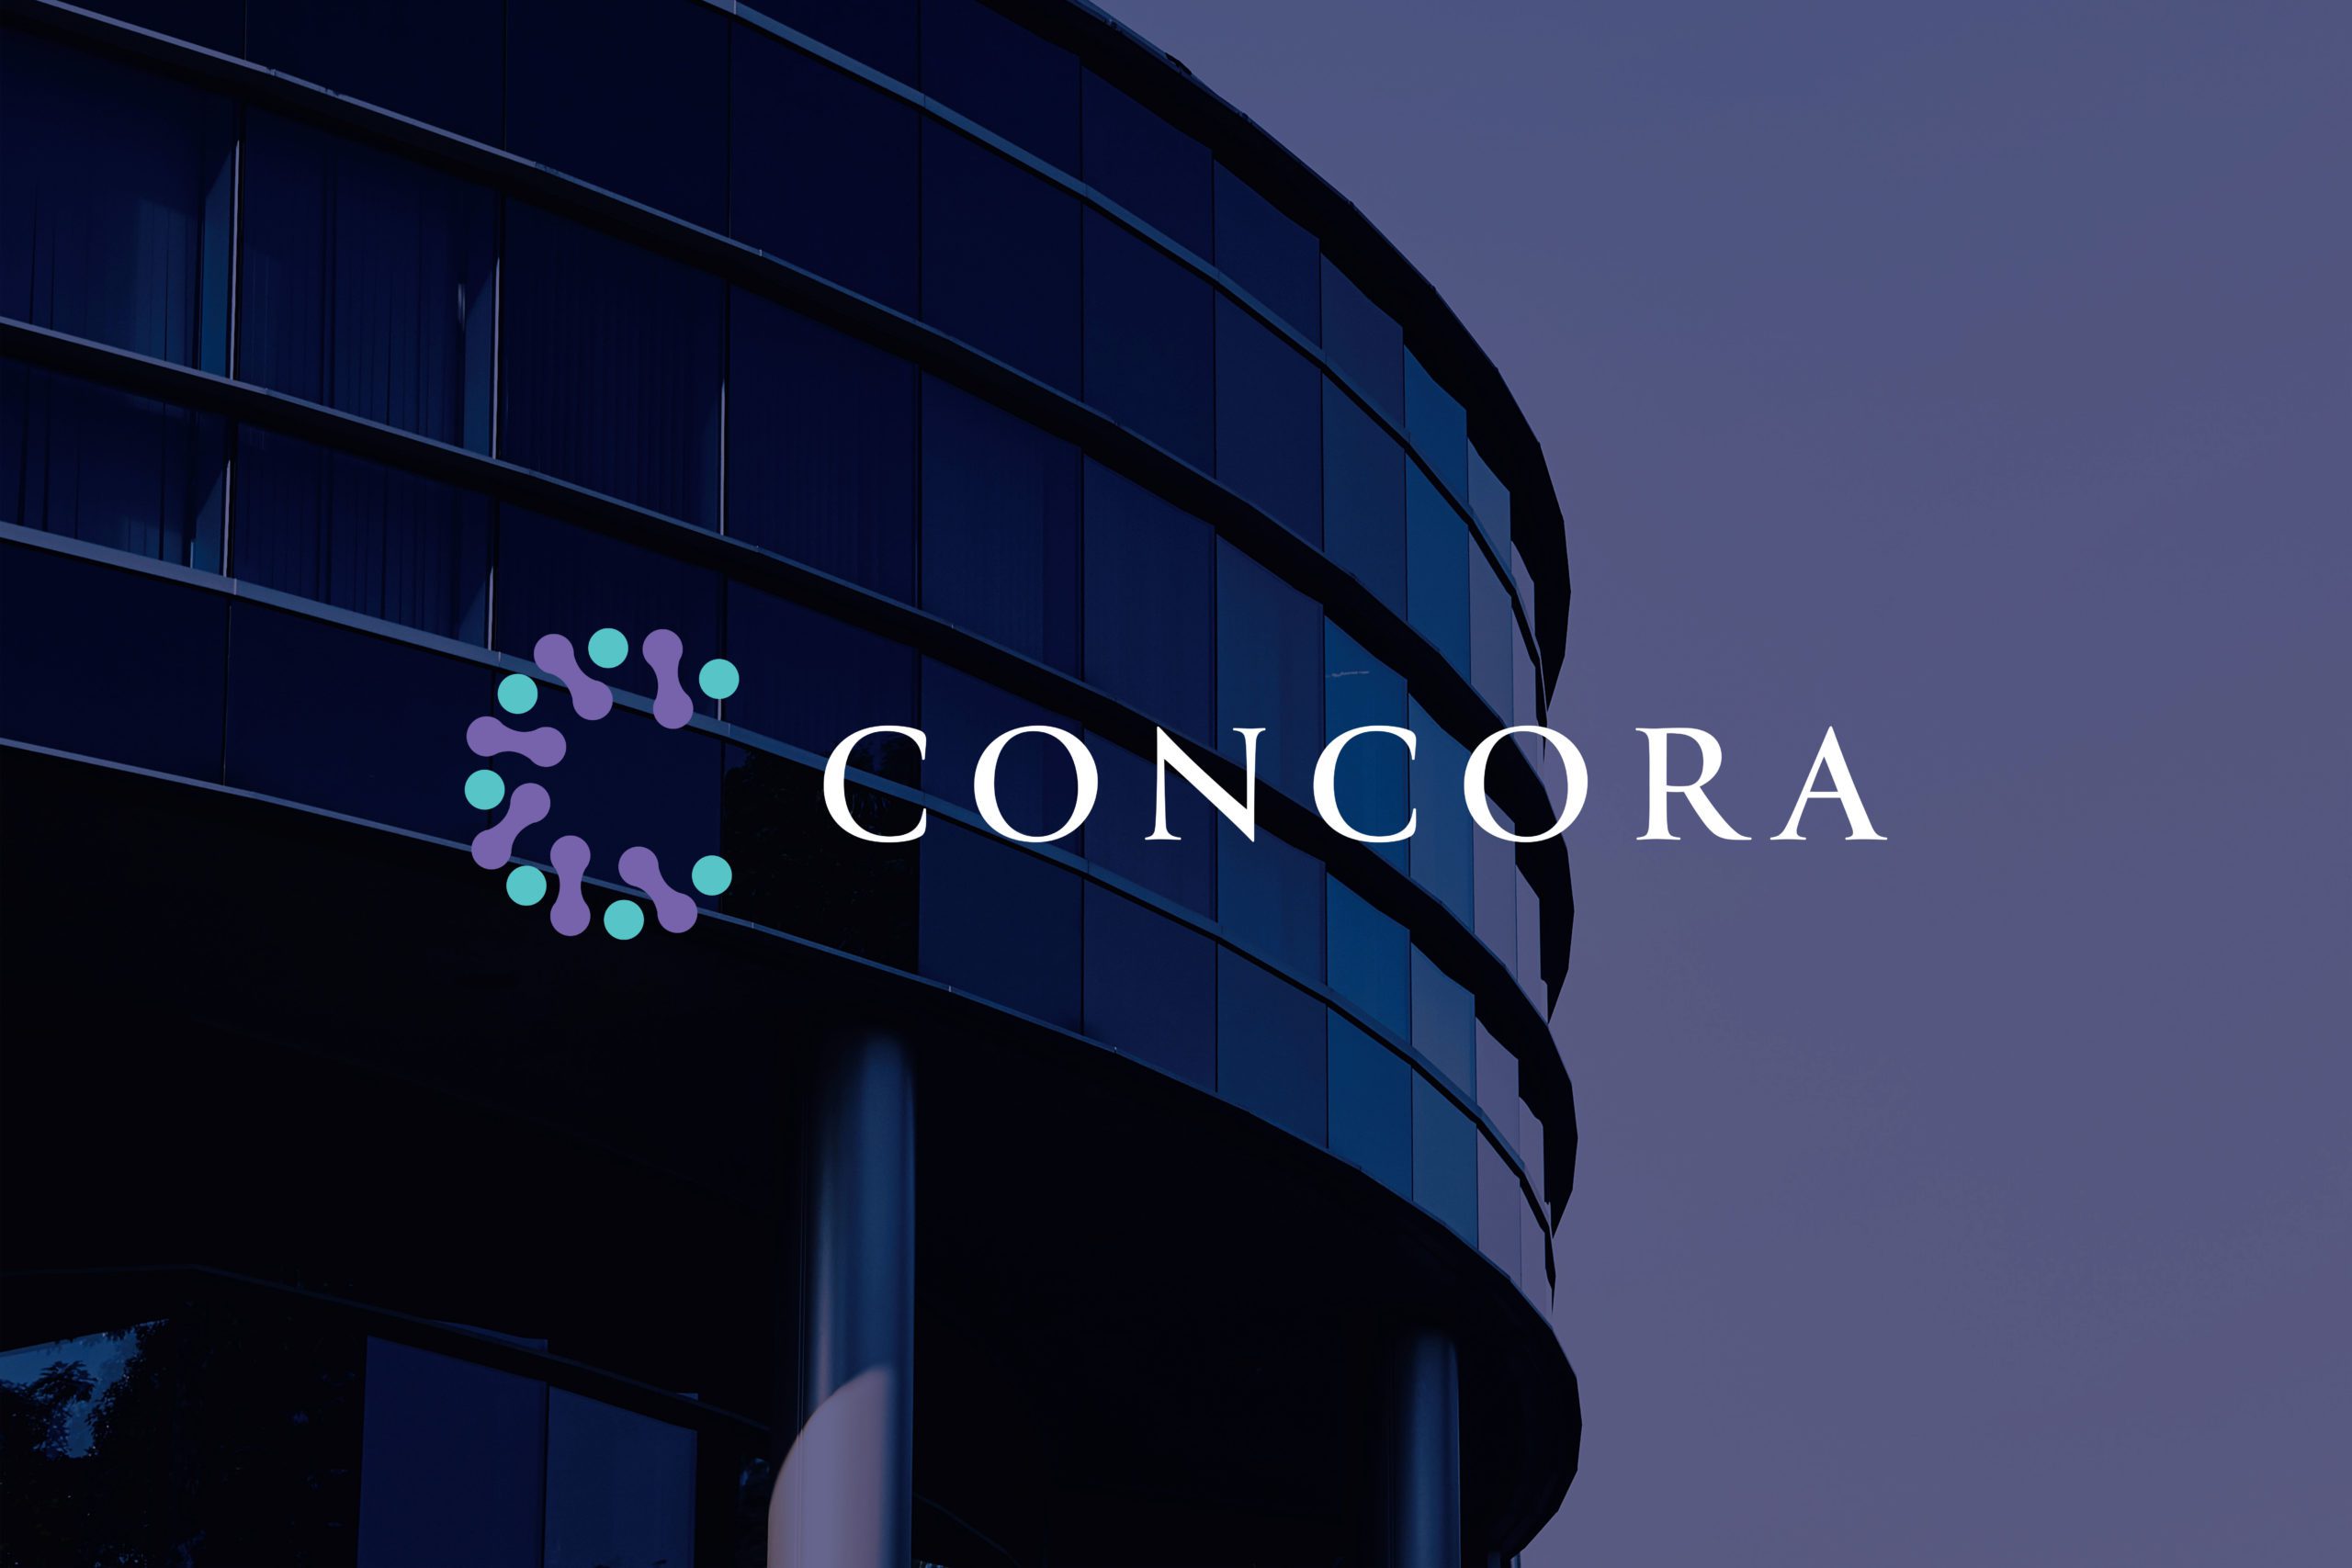 Concora Branding Project Logo Overlays On Innovative Science Building